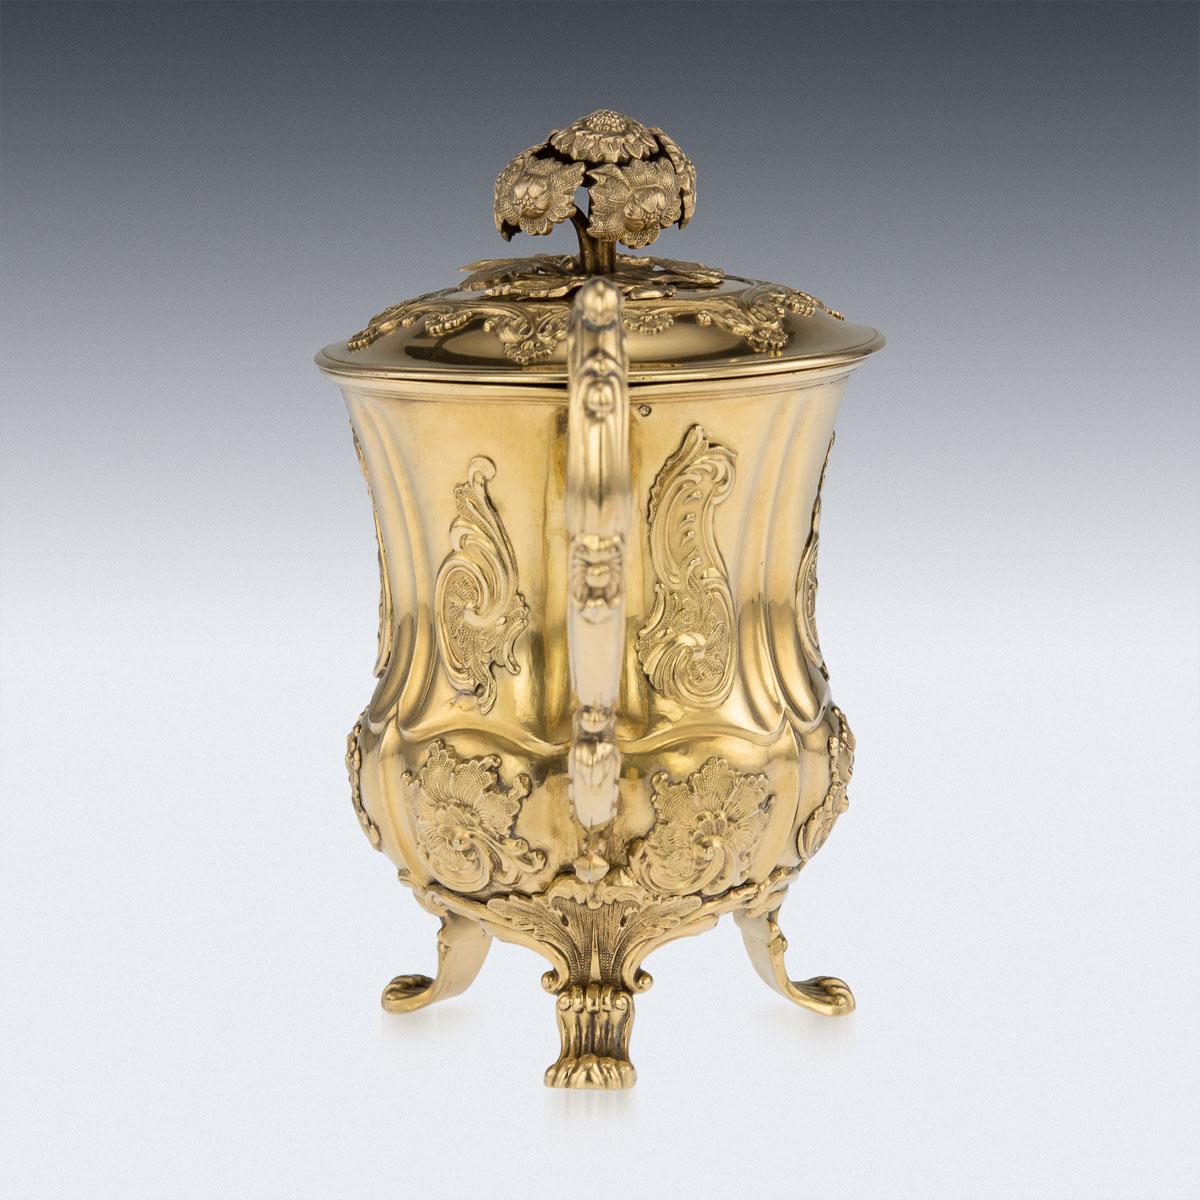 Antique mid-19th century Russian solid silver-gilt cup with cover, of fluted baluster form, the body and lid applied with clusters of scrolls and foliage, standing on 4 scroll feet and applied with a decorative handle, the lid set with a knop formed